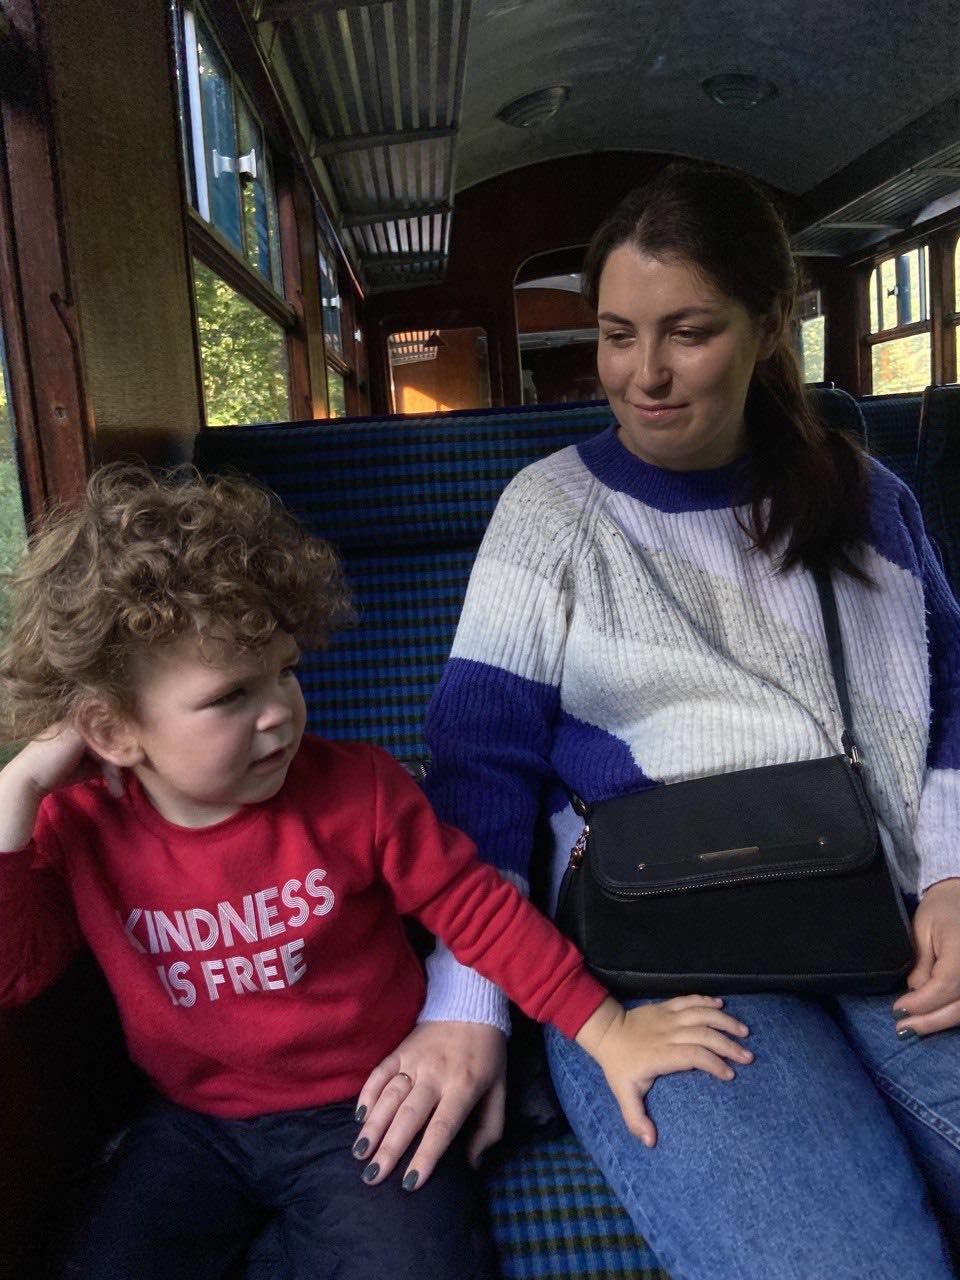 A photo of Nelia Umney with her son Jonathan sitting on a train